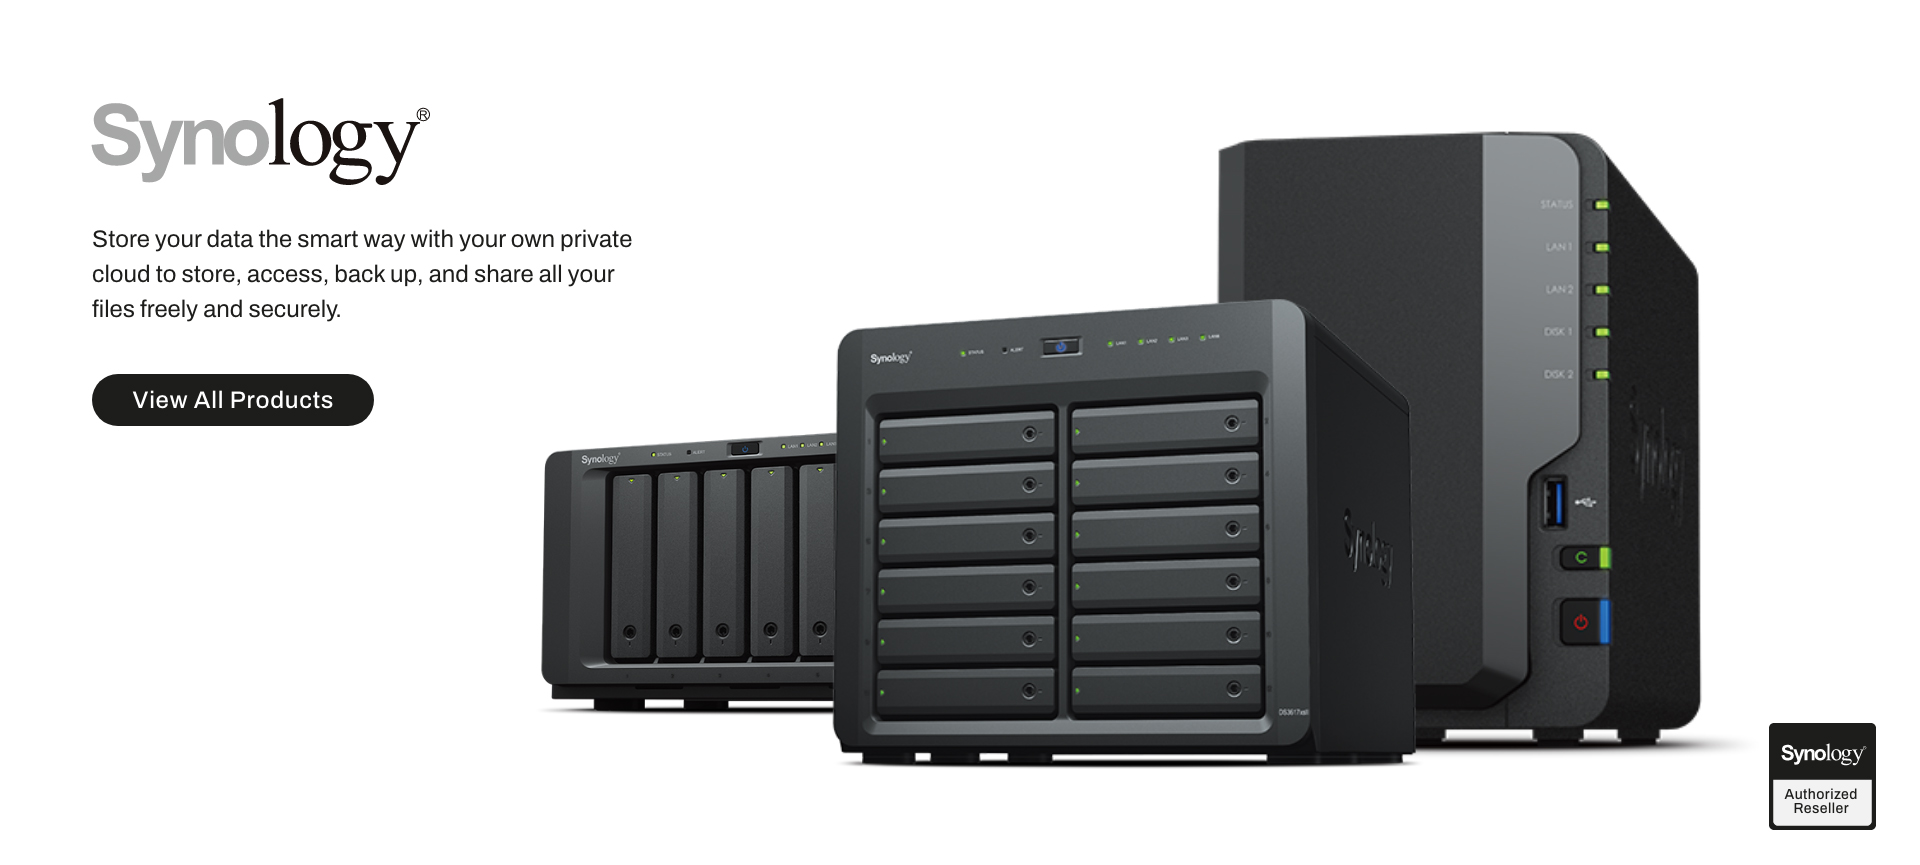 Synology products data storage